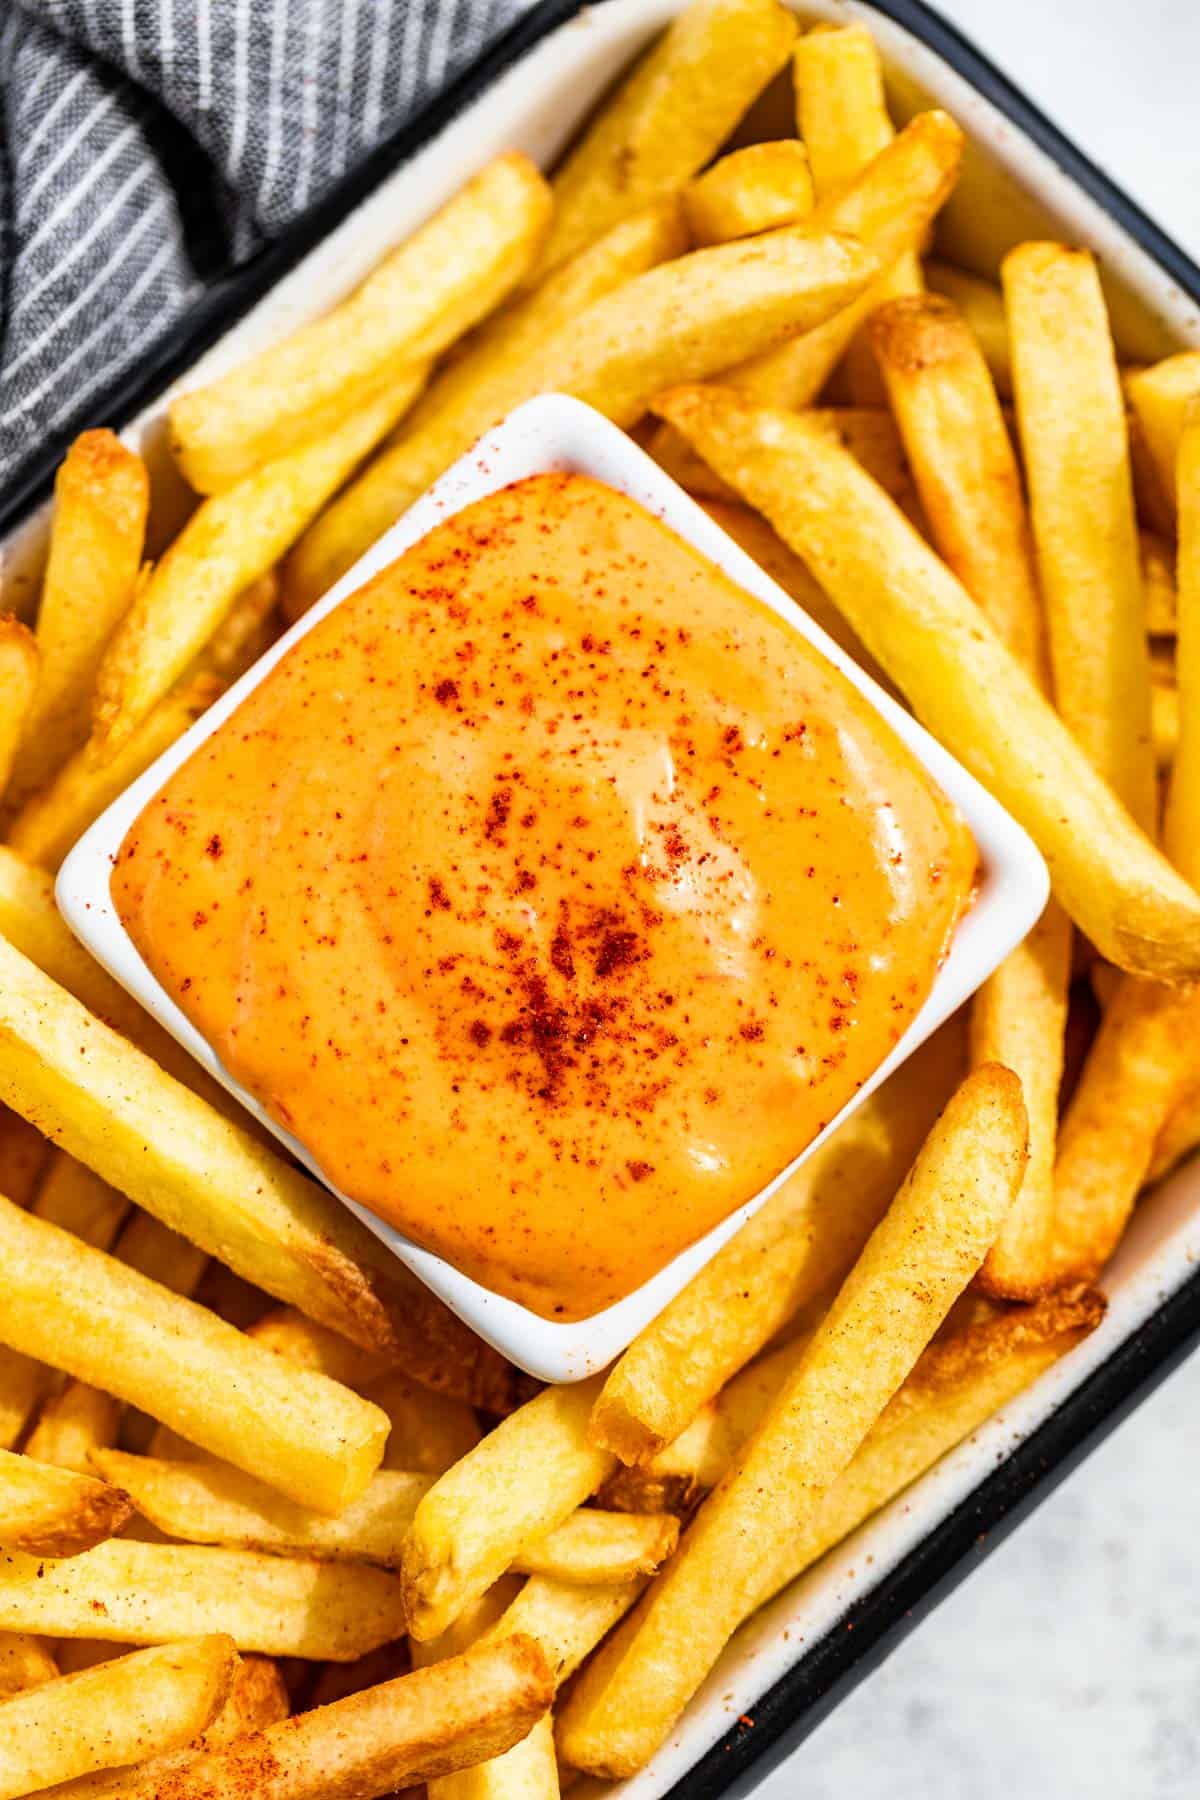 Straight down view of French fries in a square container on the diagonal with a square dish of Chipotle Aioli in the center.